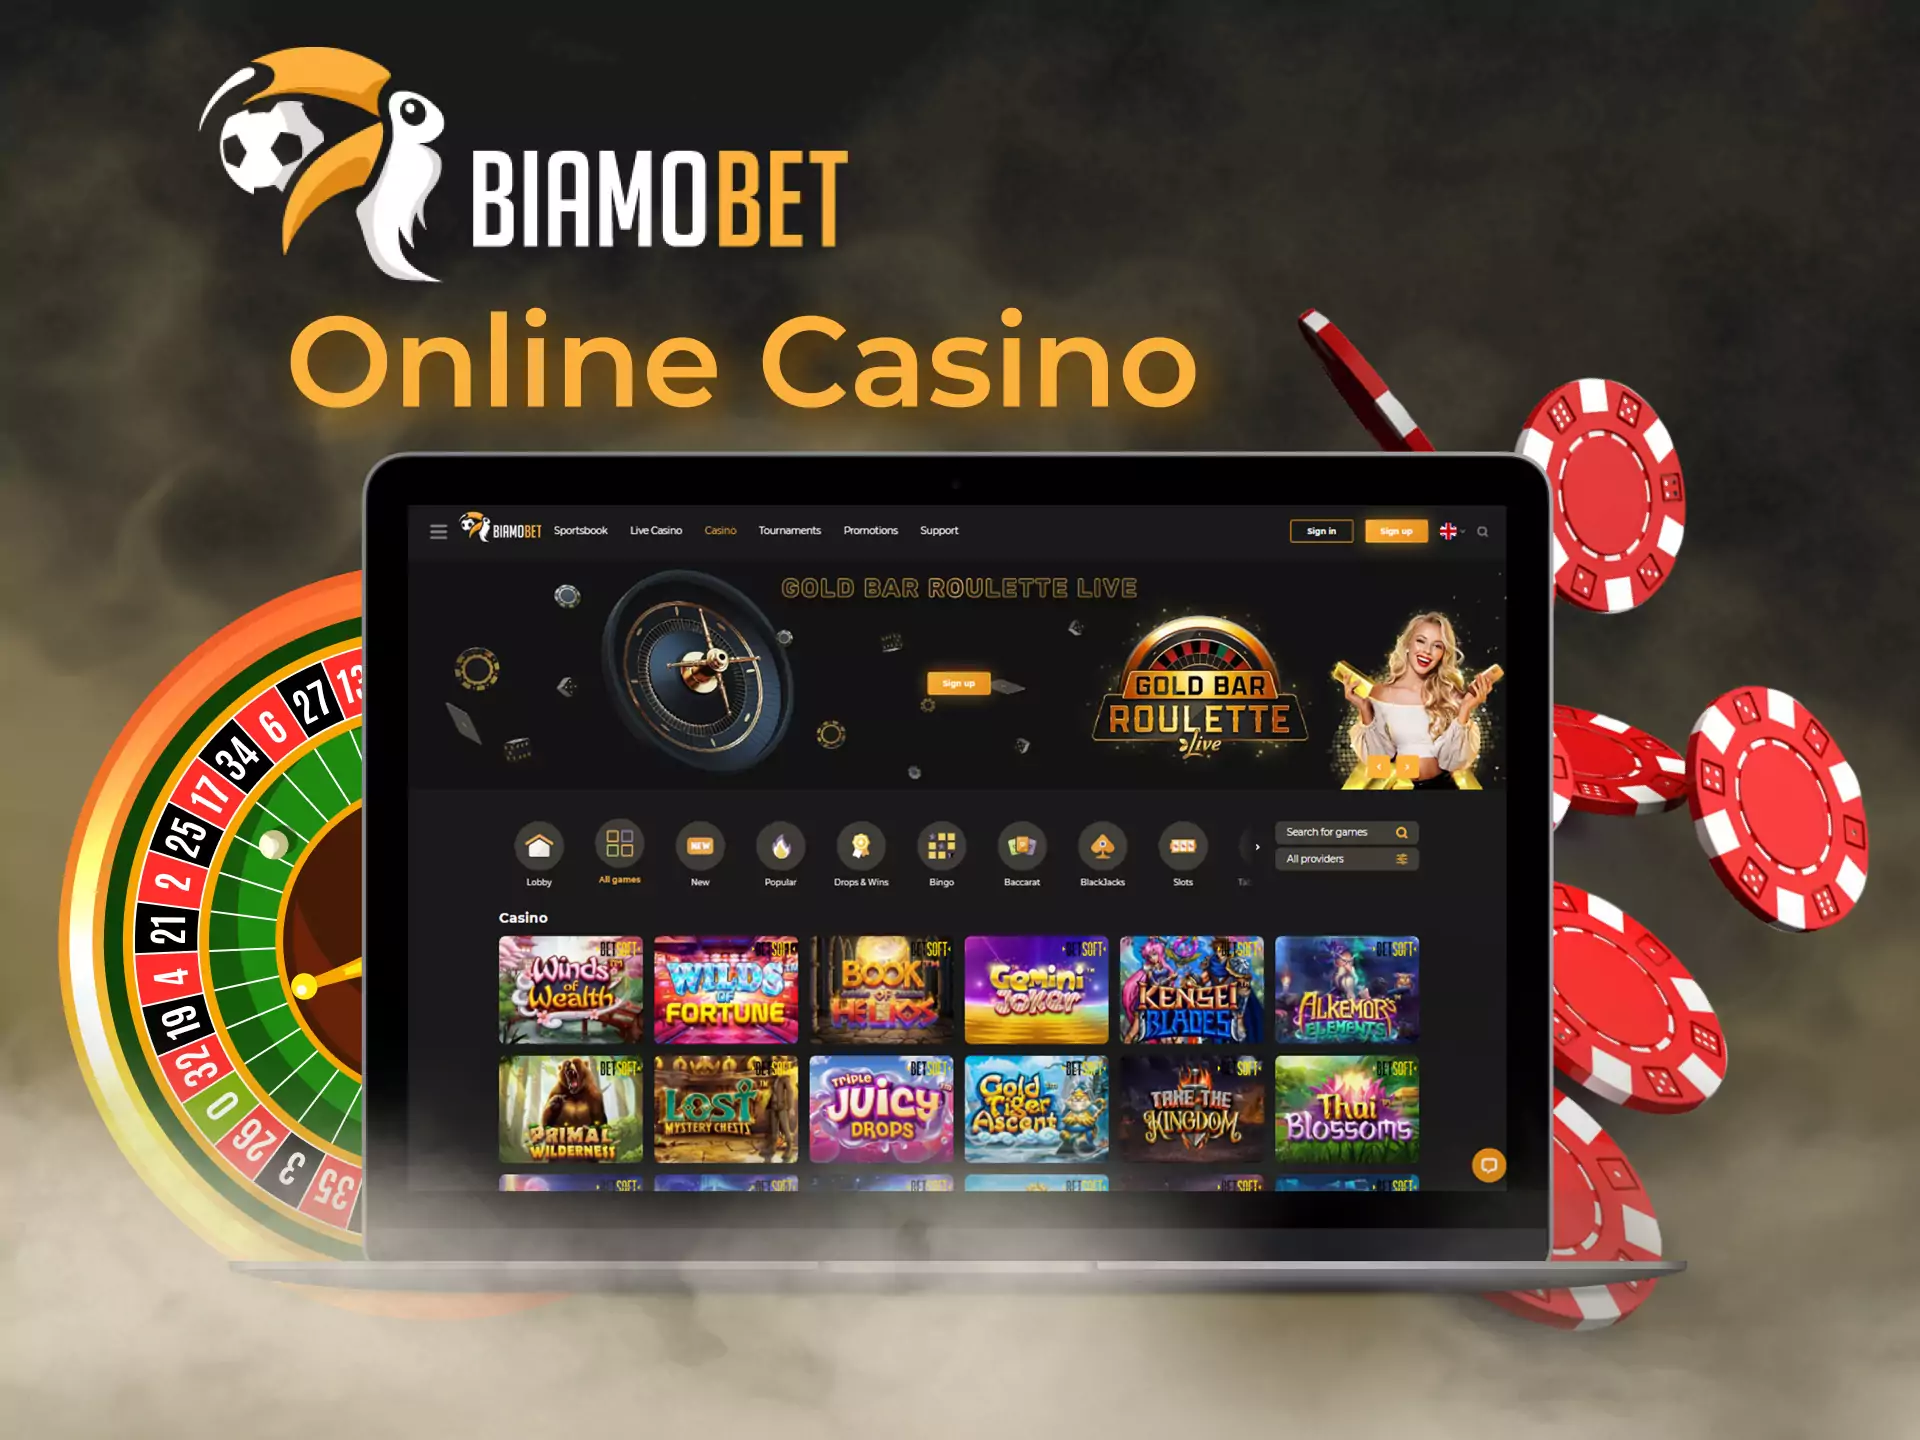 Casino games are available online on the Biamobet website.